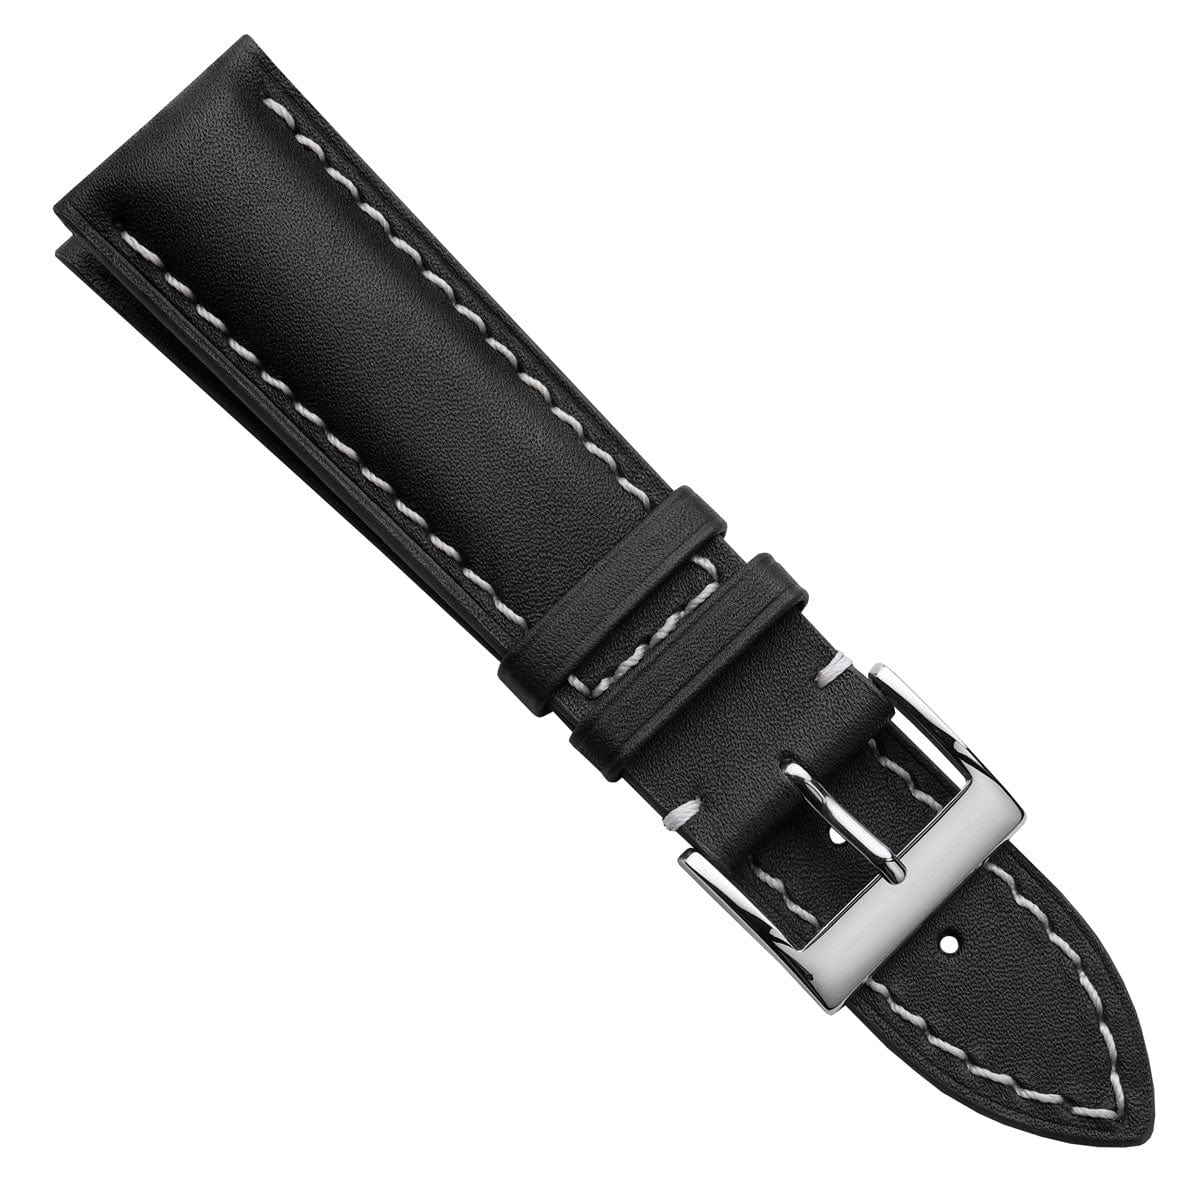 Ostend Thick Padded Leather Watch Strap - Baranil Black